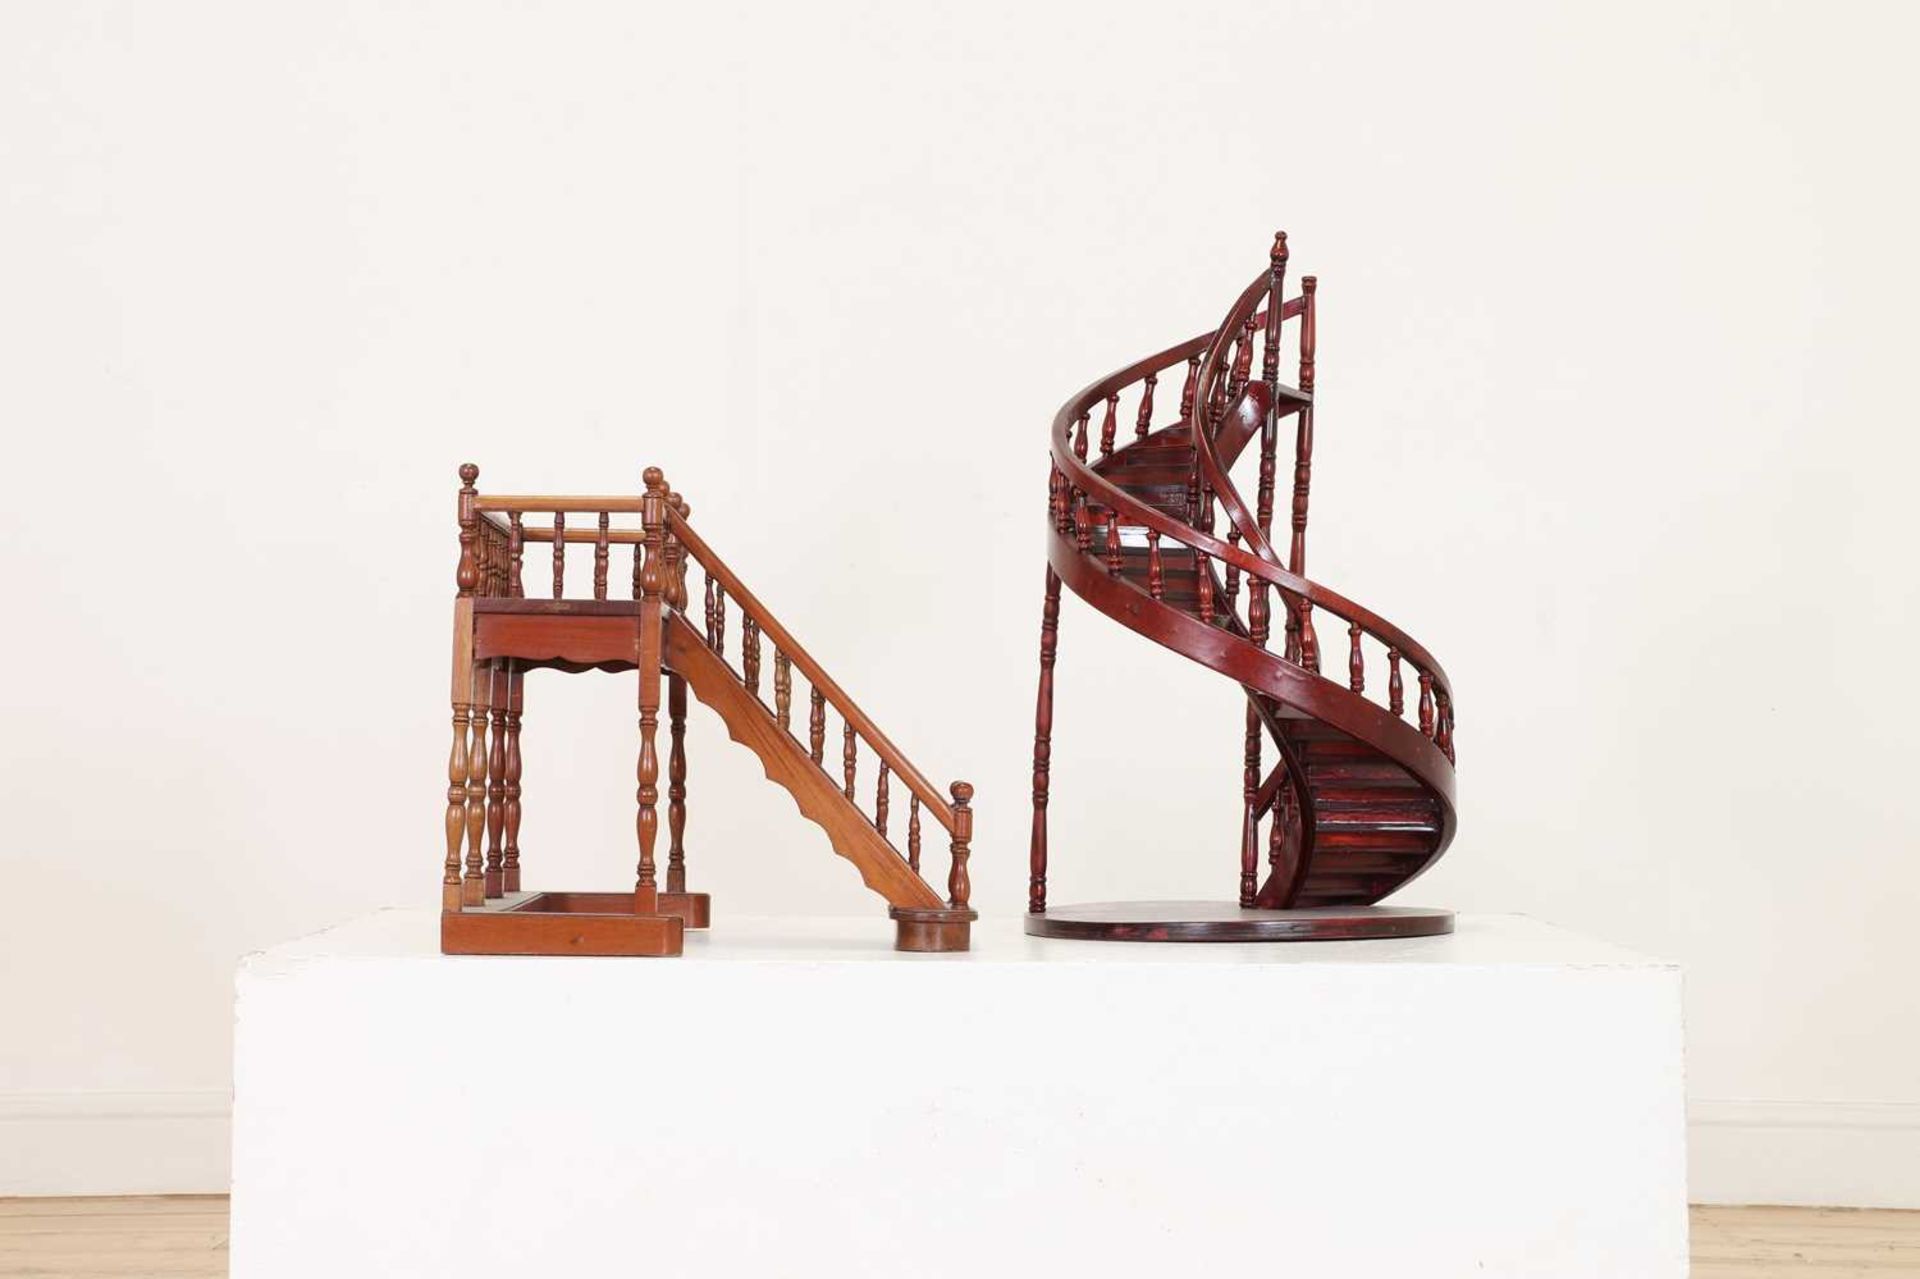 Two wooden architectural models of staircases, - Image 2 of 39